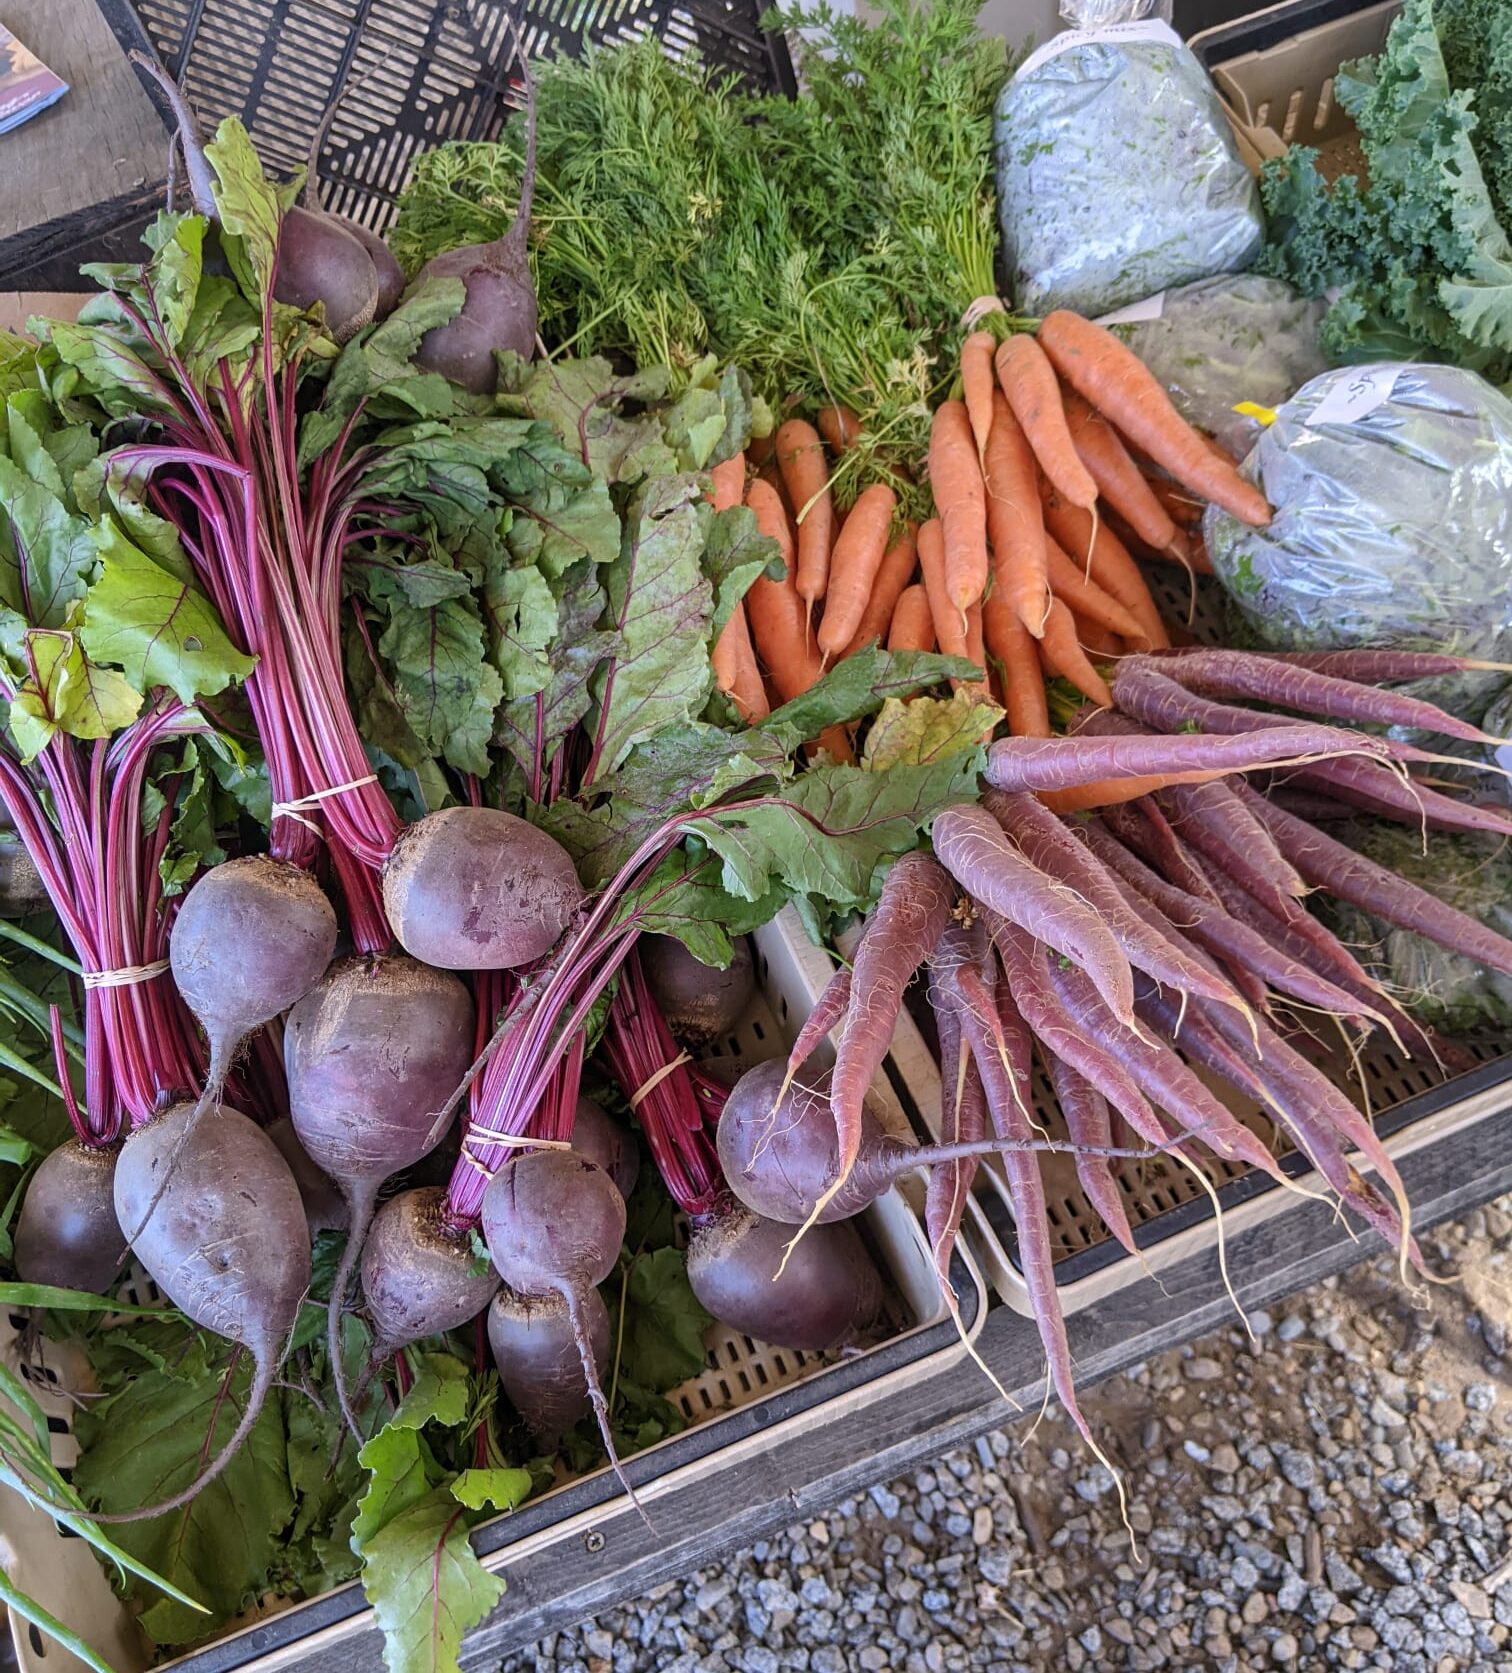 Produce at a farm stand including radishes and carrots in bunches.